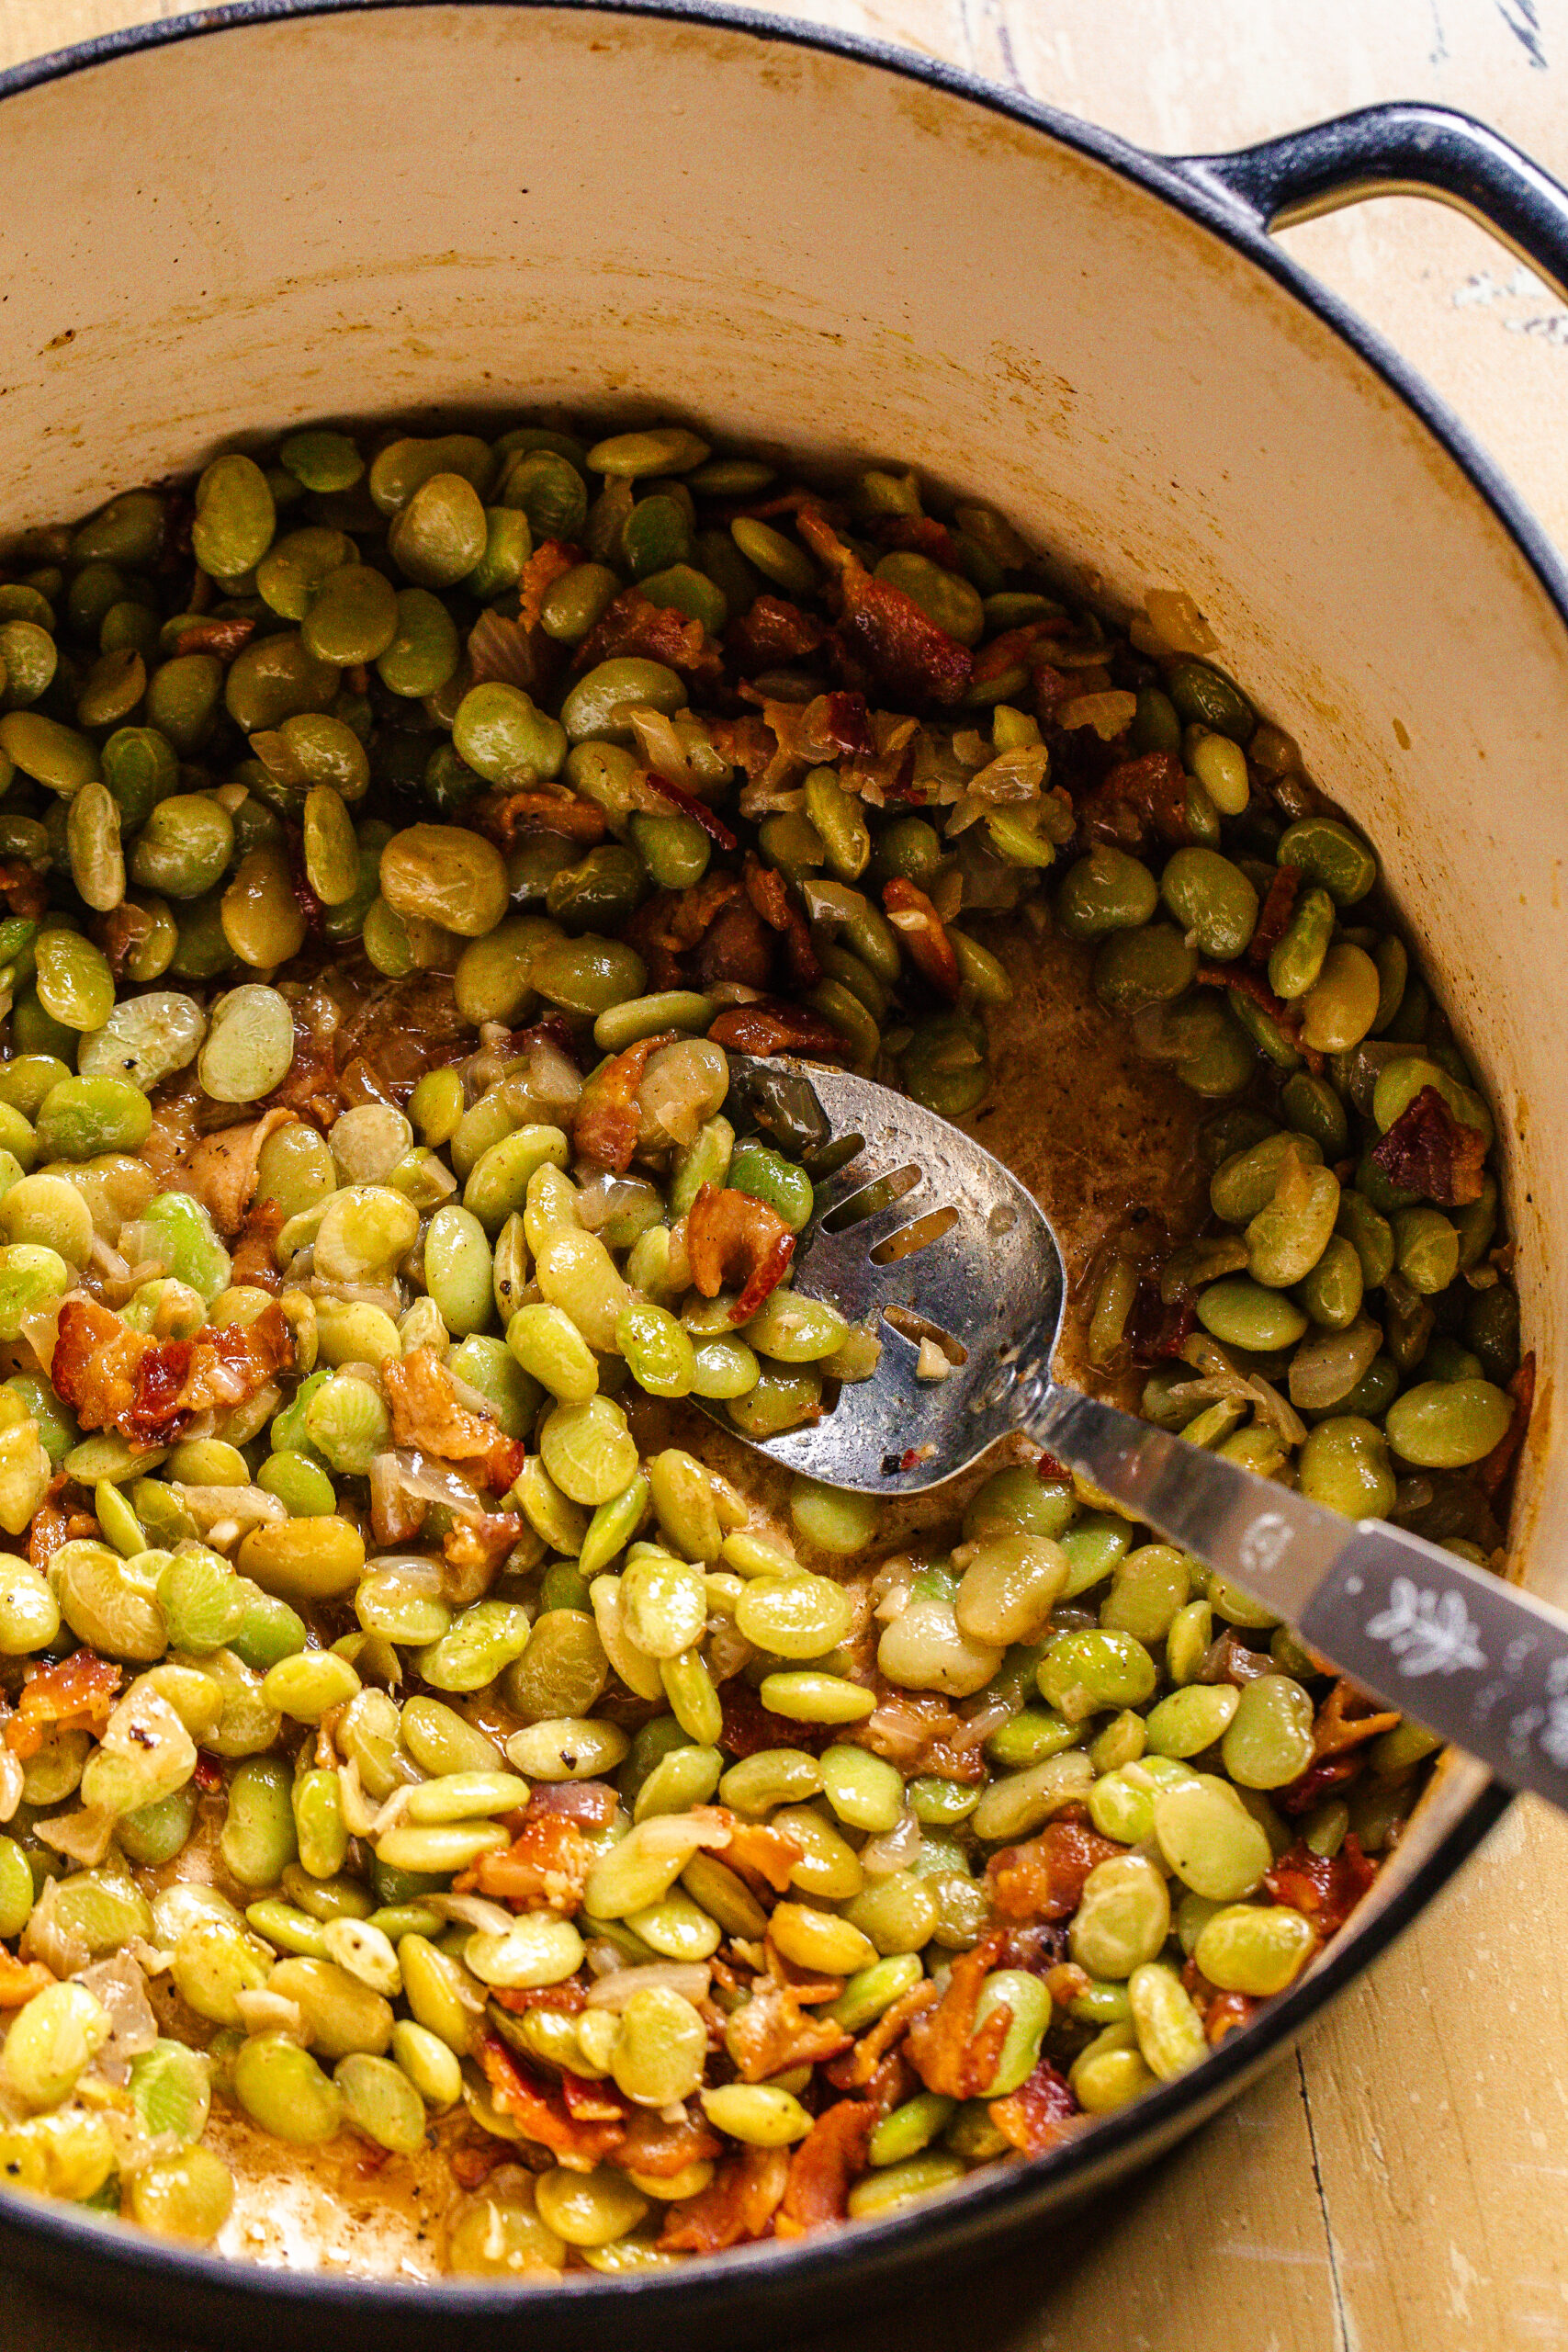 A Recipe for Southern Butter Beans (They’re tasty. Give them a chance!)